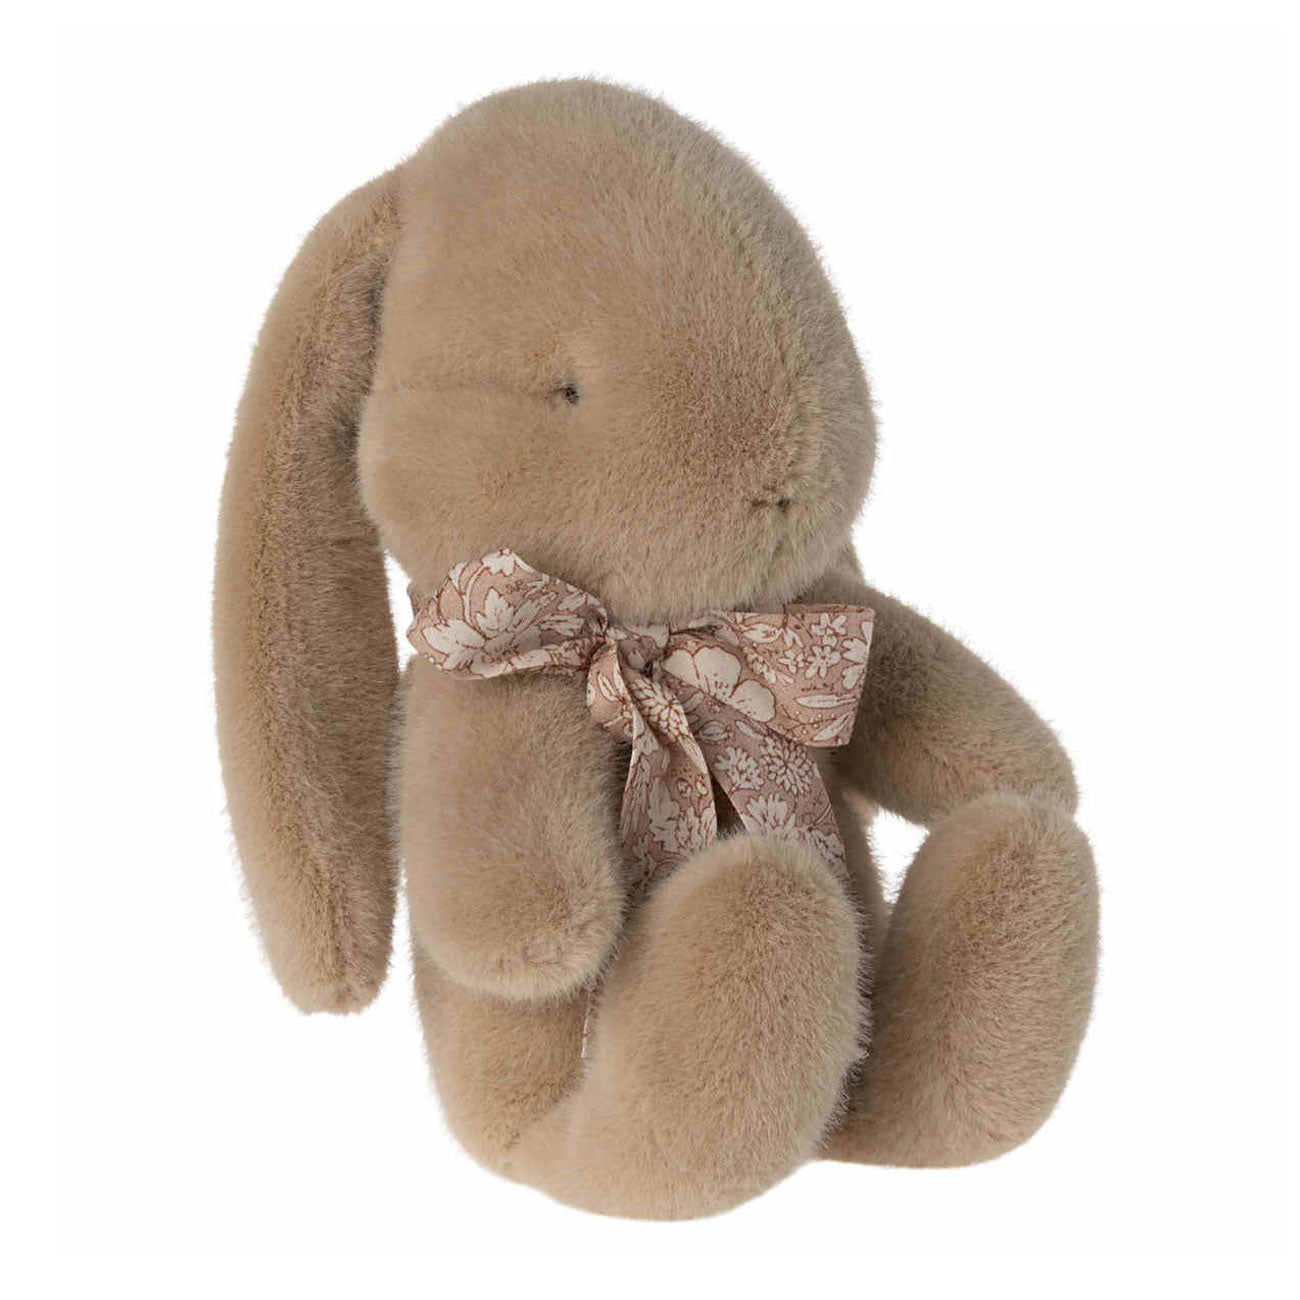 Maileg Plush Bunny - Small - Cream Peach with Pink Floral Bow